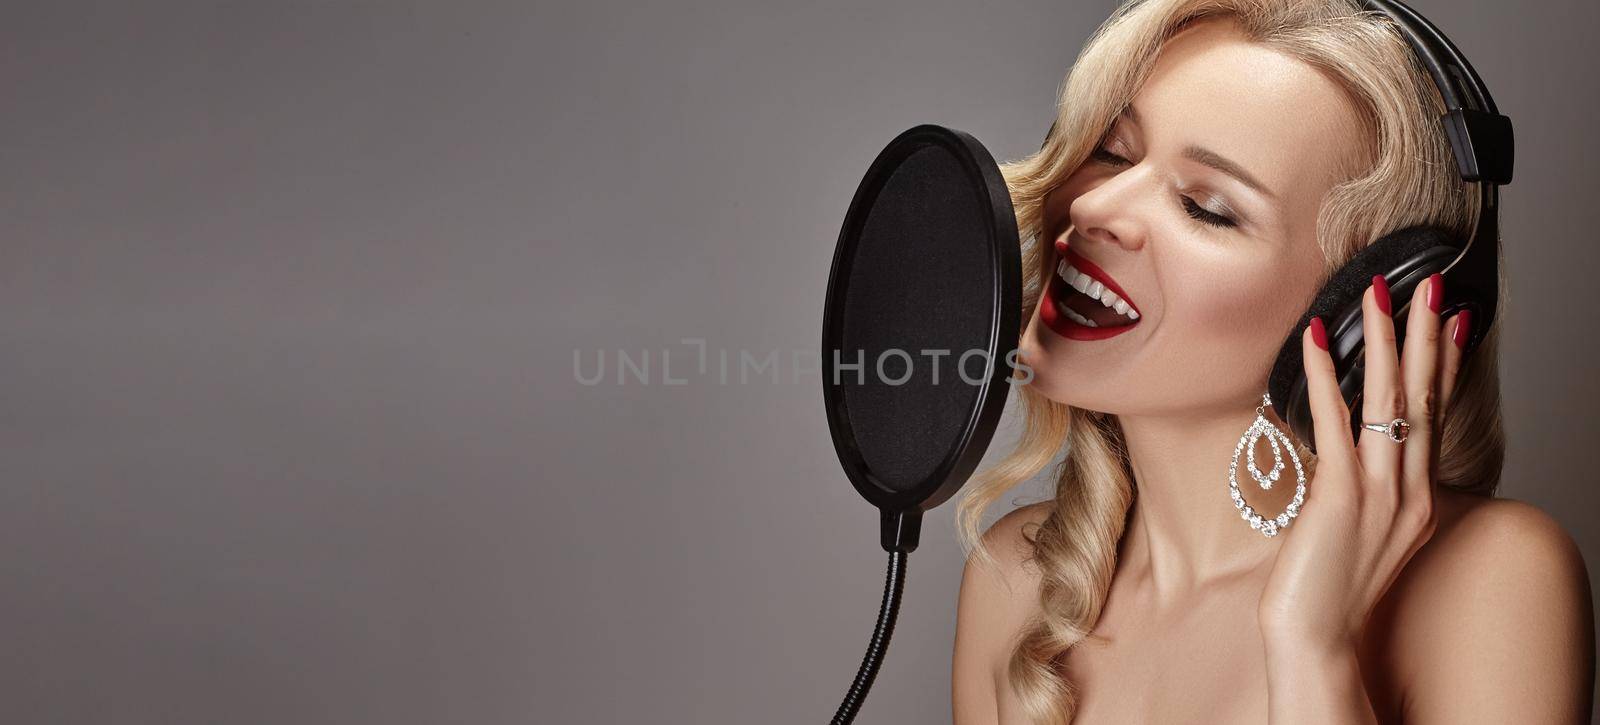 Beautiful Blonde Woman Singing Song in Professional Recording Studio with Microphone, Pop Filter and Headphones. Glamour Pop Diva Creates New Musical Track. Music Karaoke with Female Vocal Artist.